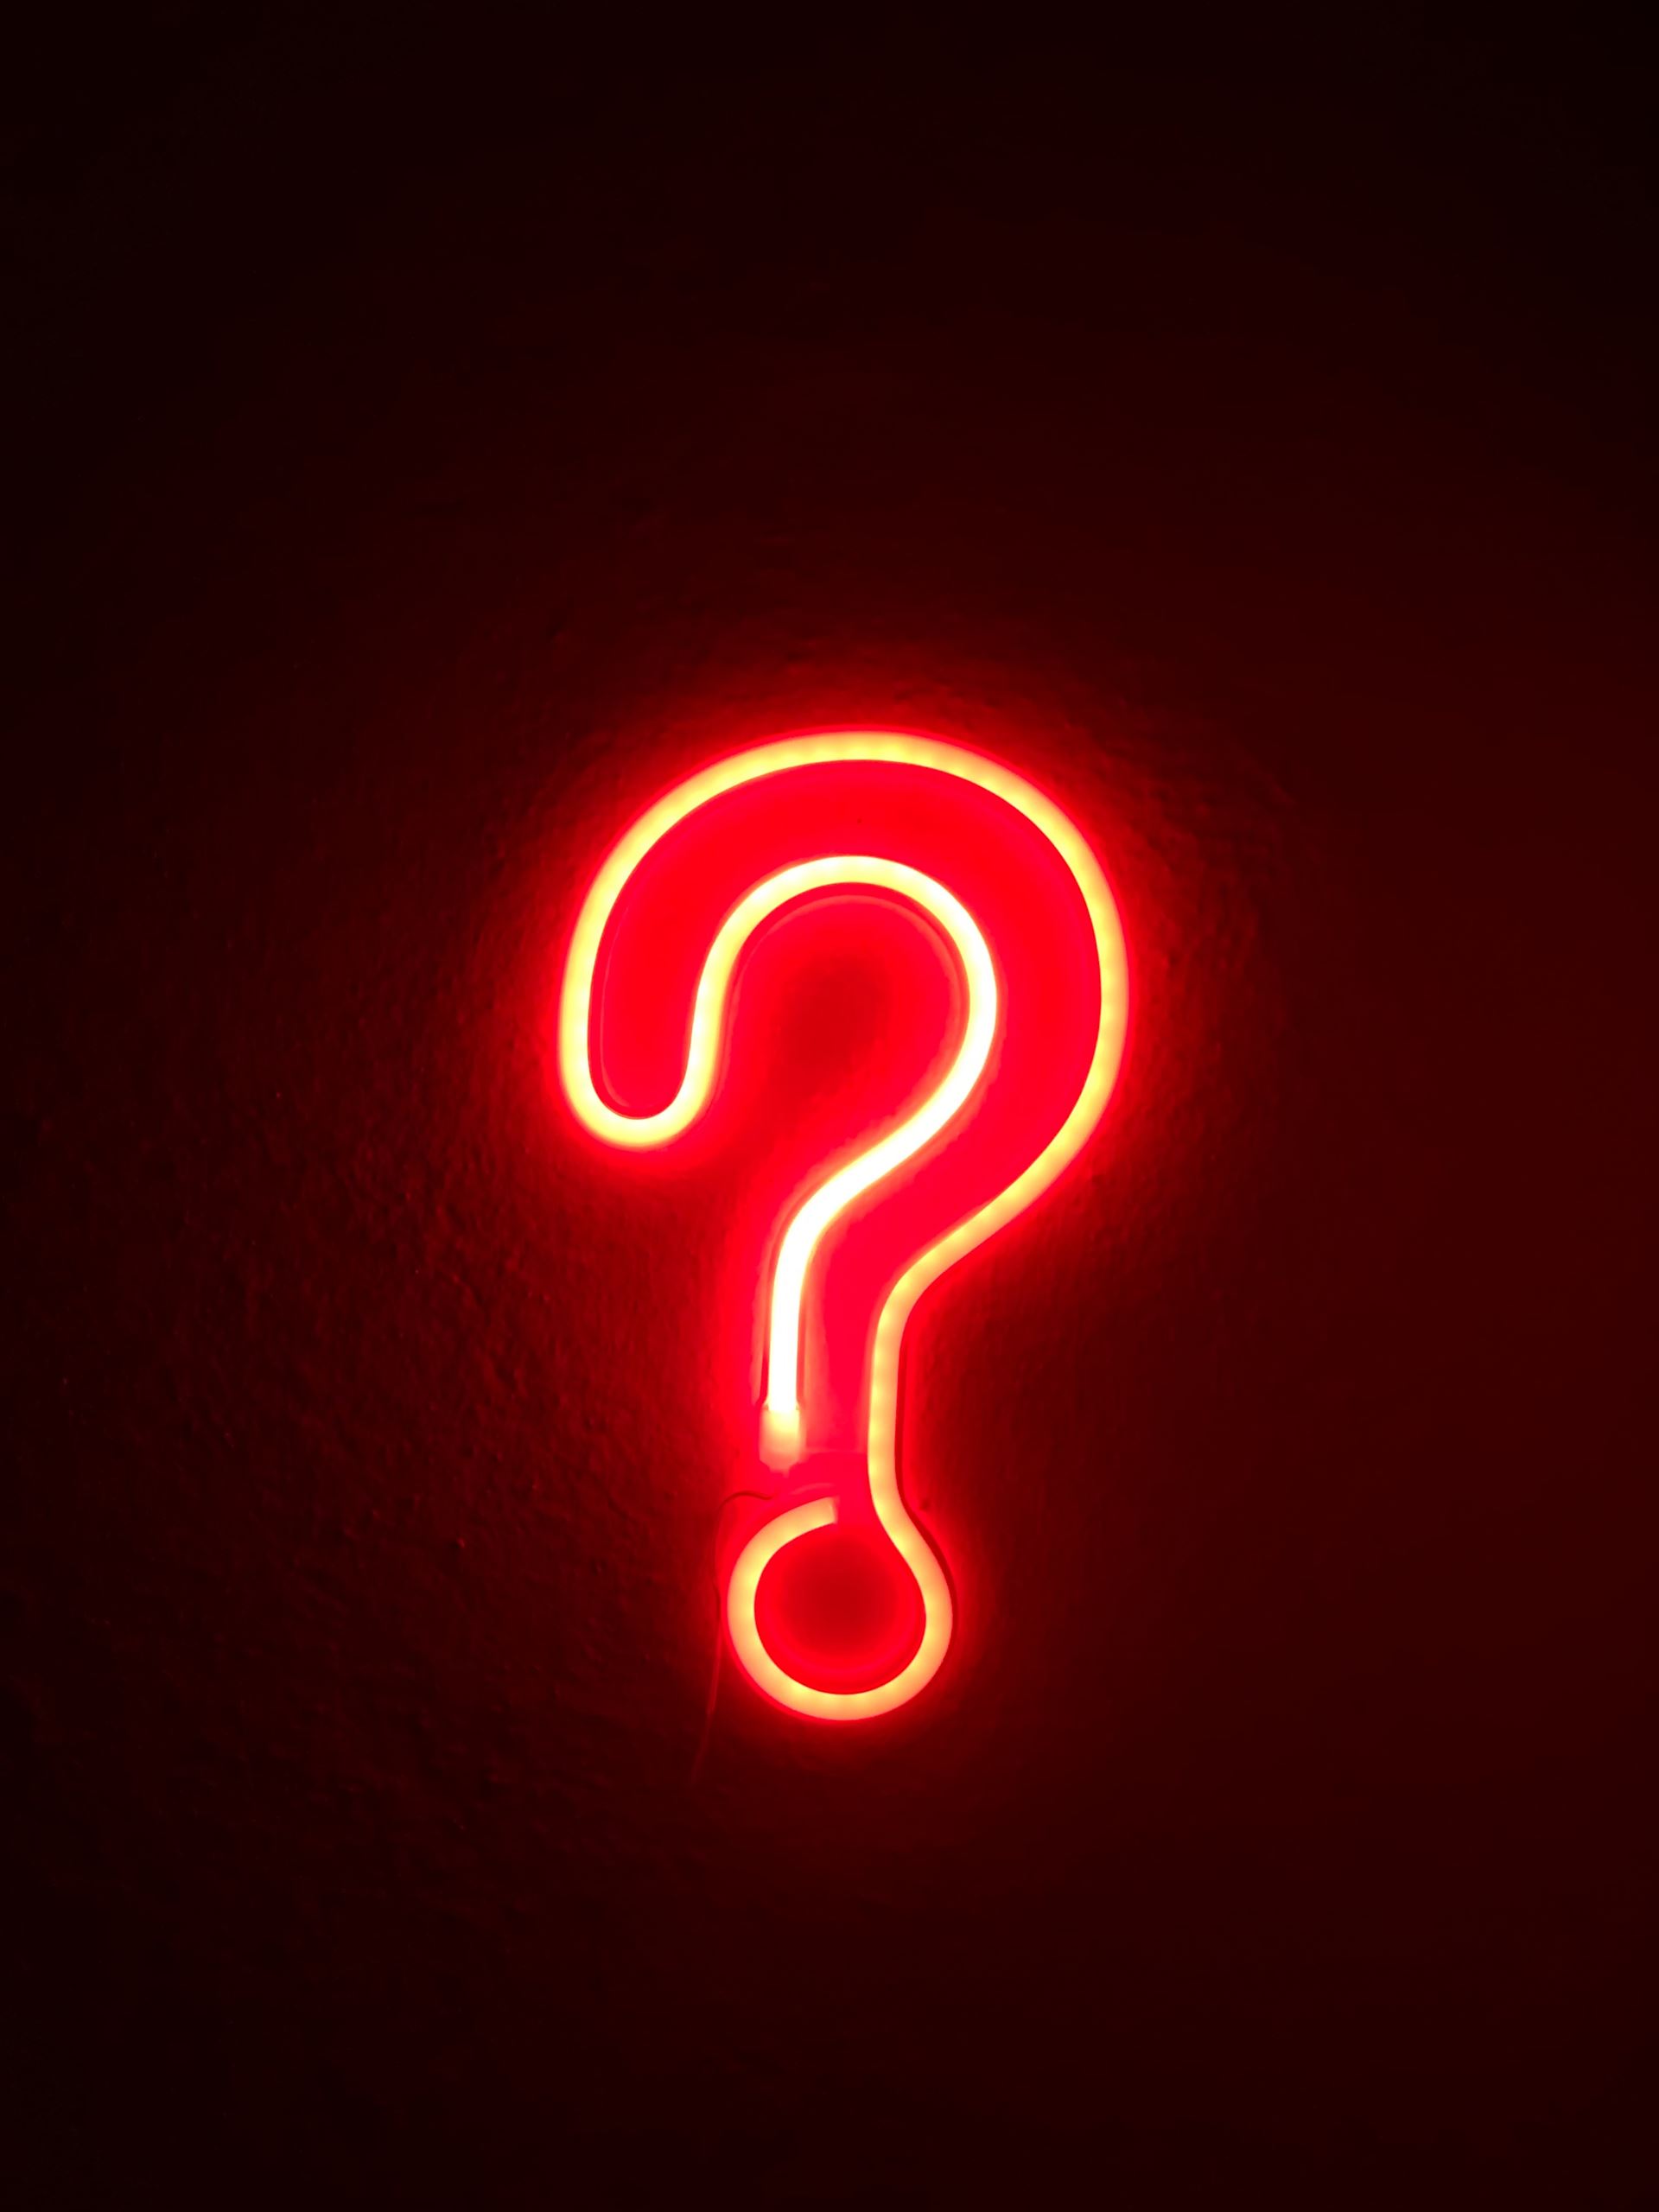 Neon question mark sign